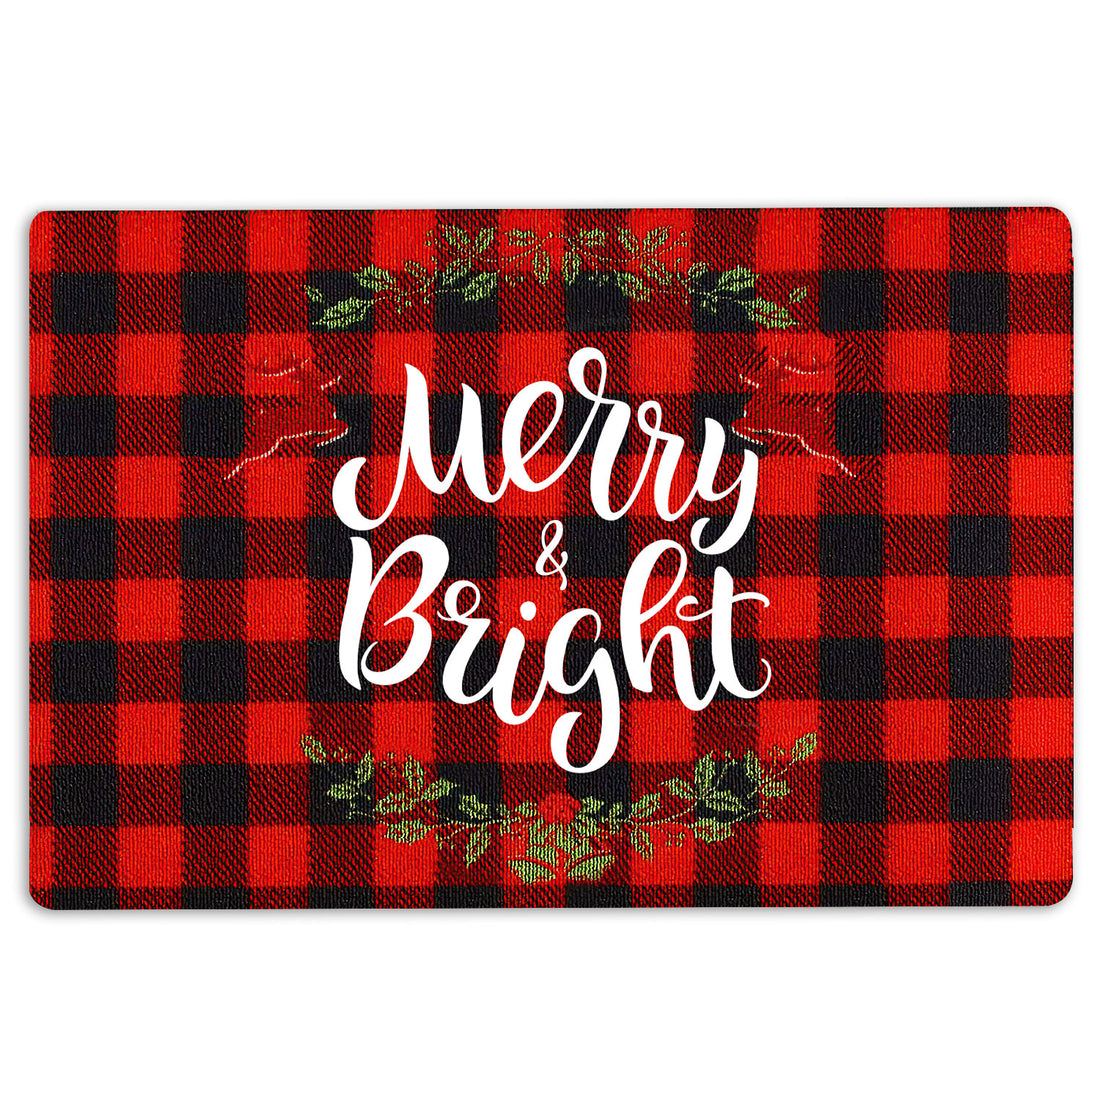 Ohaprints-Doormat-Outdoor-Indoor-Merry-And-Bright-Christmas-Wreath-Red-Buffalo-Plaid-Xmas-Holiday-Rubber-Door-Mat-2011-18'' x 30''